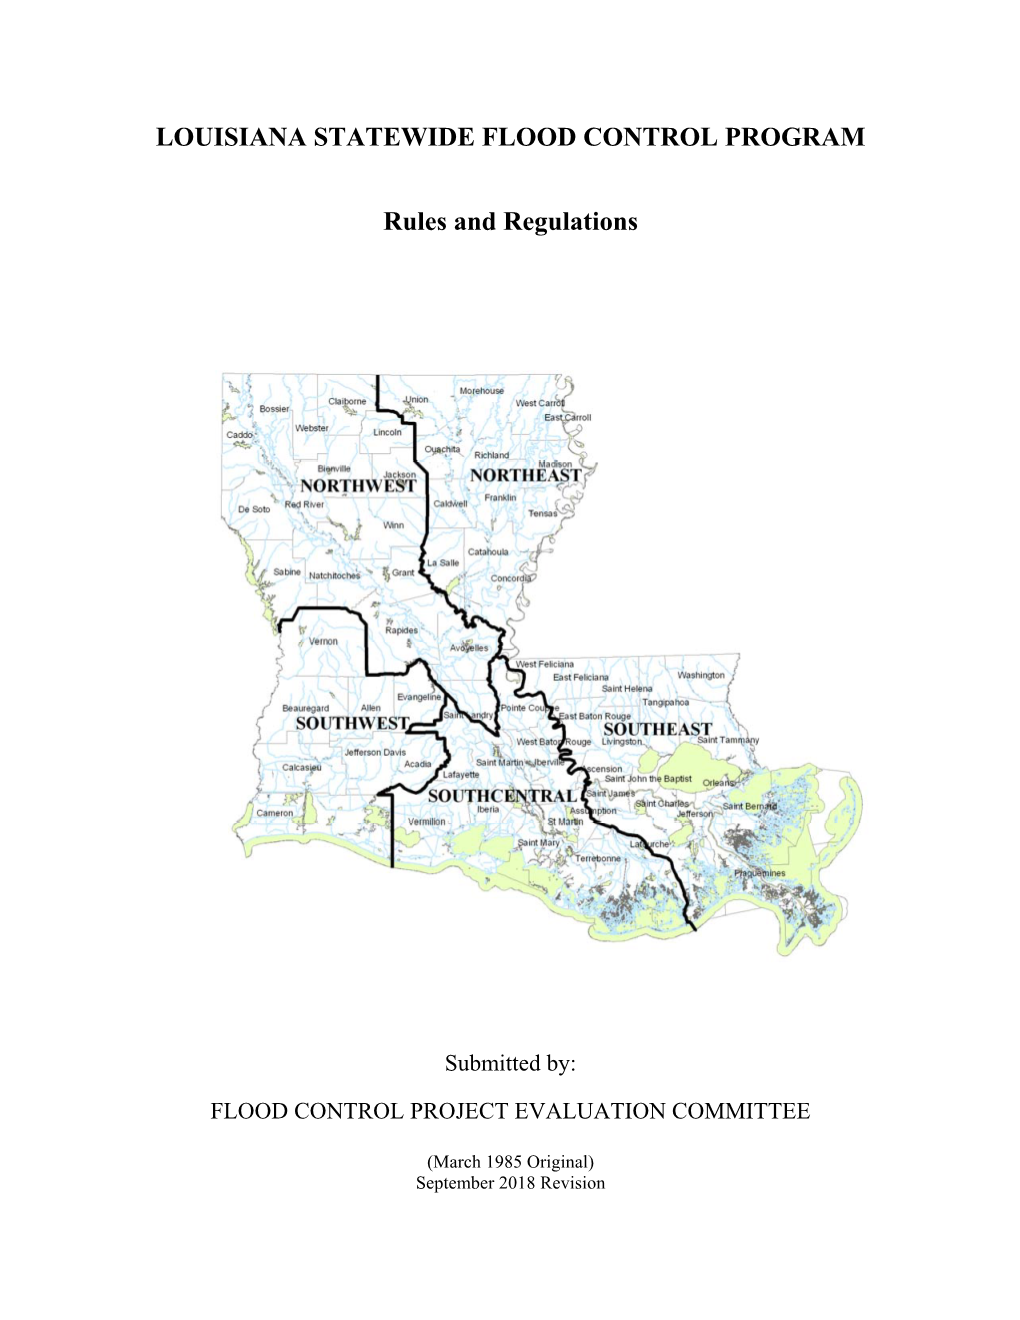 LOUISIANA STATEWIDE FLOOD CONTROL PROGRAM Rules And